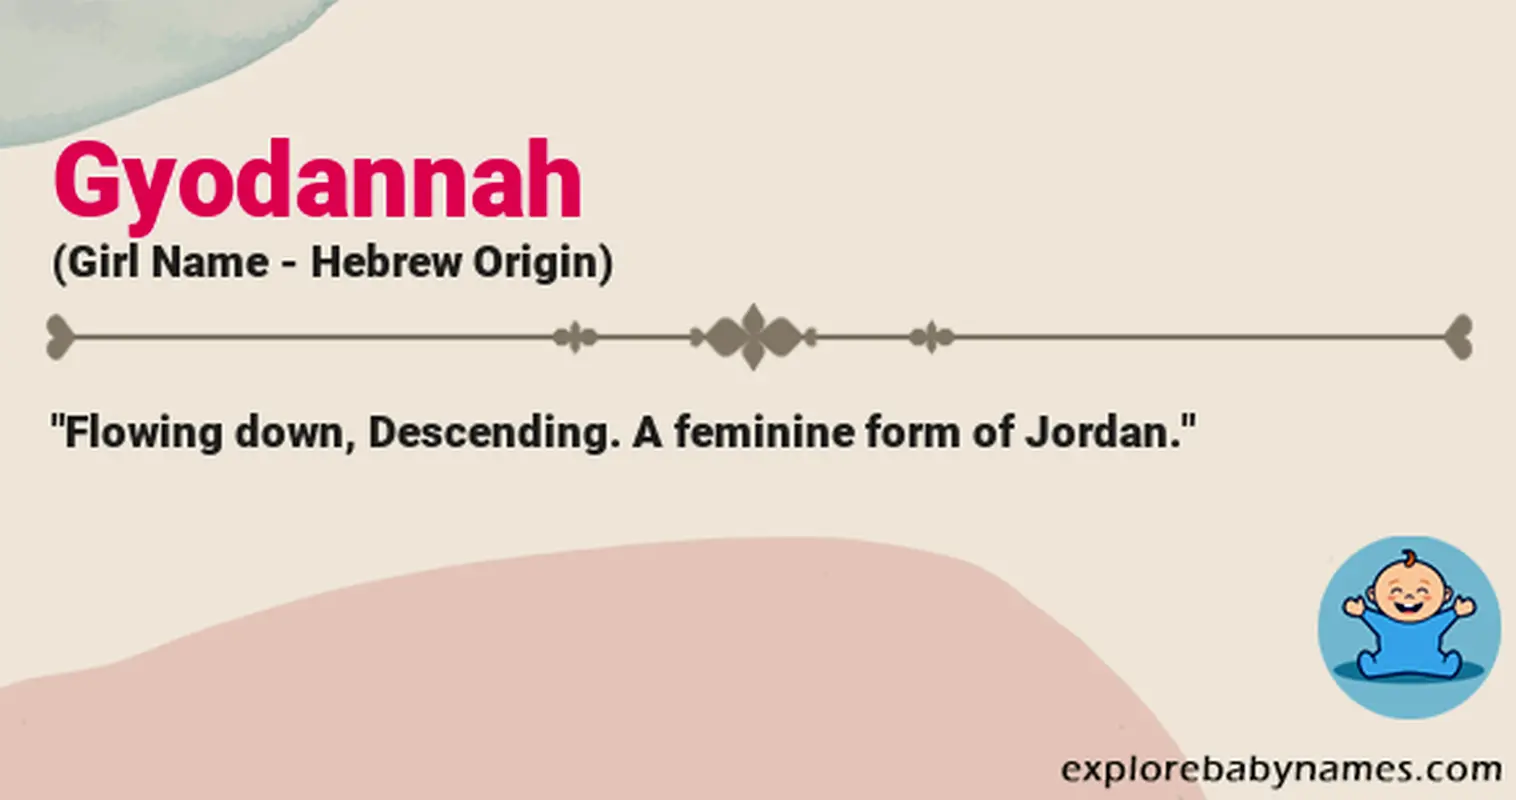 Meaning of Gyodannah